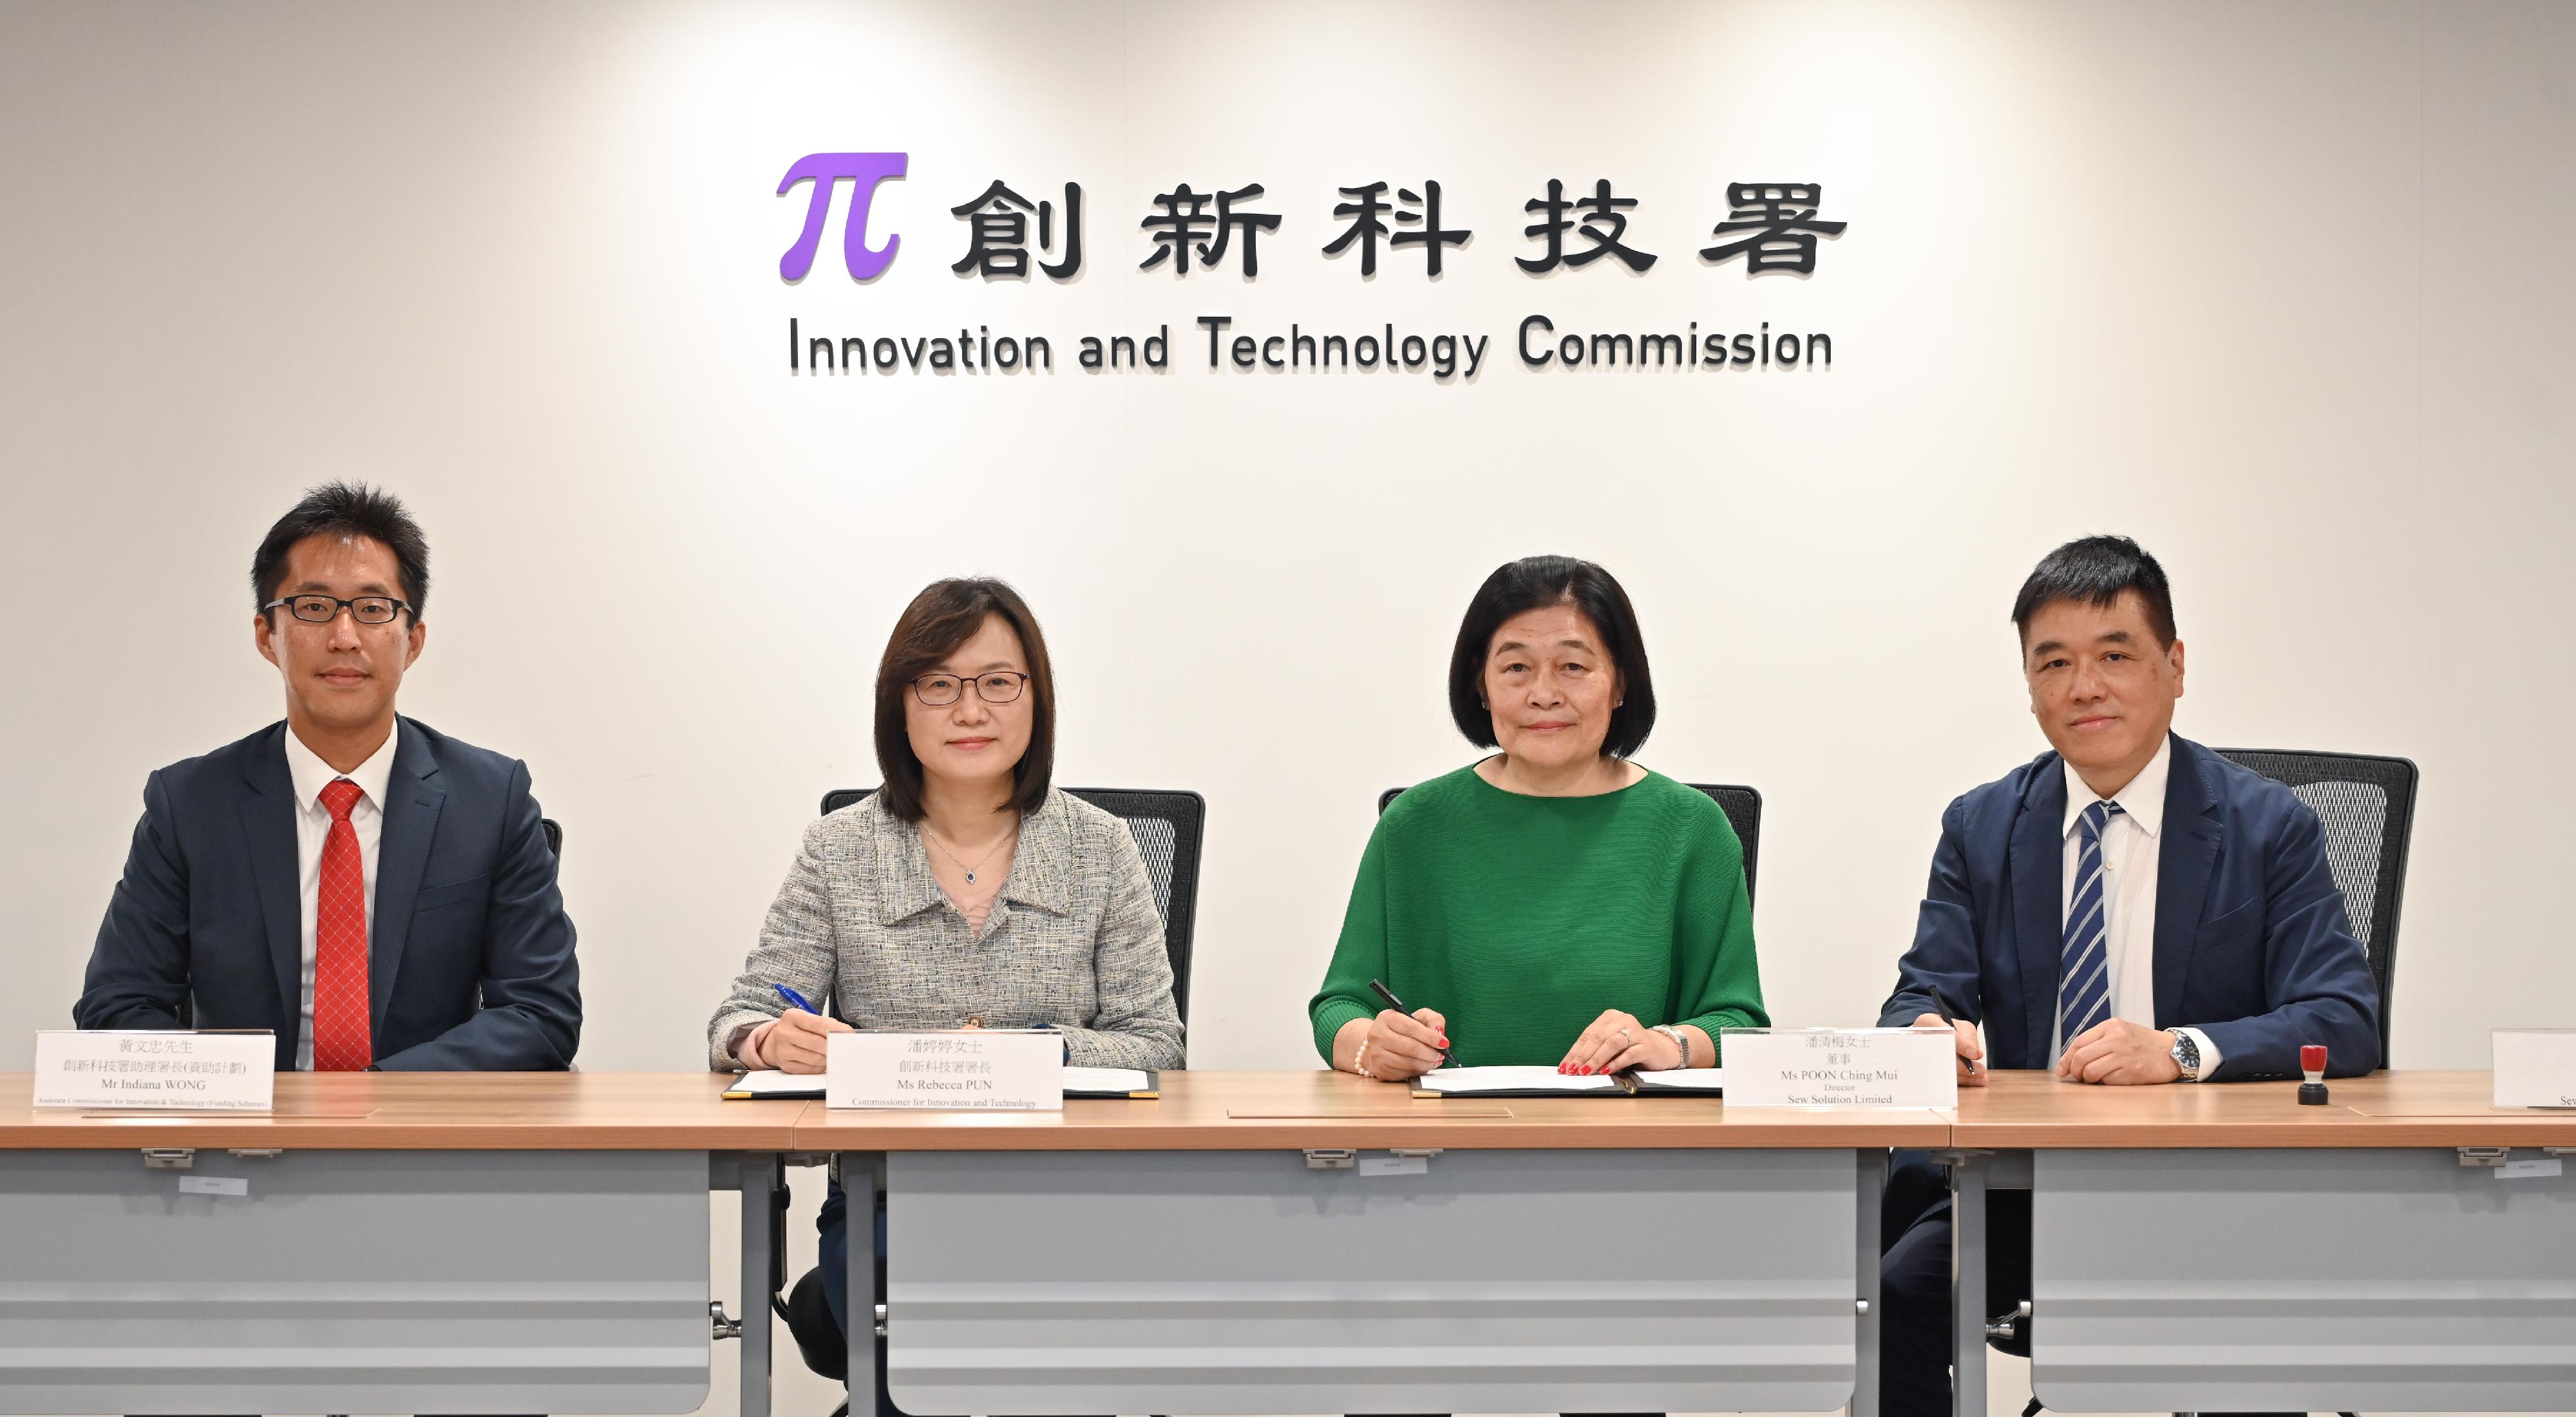 The Re-industrialisation Funding Scheme has approved funding for a project by Sew Solution Limited to set up a smart production line for digital whole-garment knitwear. Photo shows the Commissioner for Innovation and Technology, Ms Rebecca Pun (second left); the Assistant Commissioner for Innovation and Technology (Funding Schemes), Mr Indiana Wong (first left); Director of Sew Solution Limited Ms Poon Ching-mui (second right); and Director of Sew Solution Limited Mr Gary Pu (first right), signing the funding agreement today (March 14).